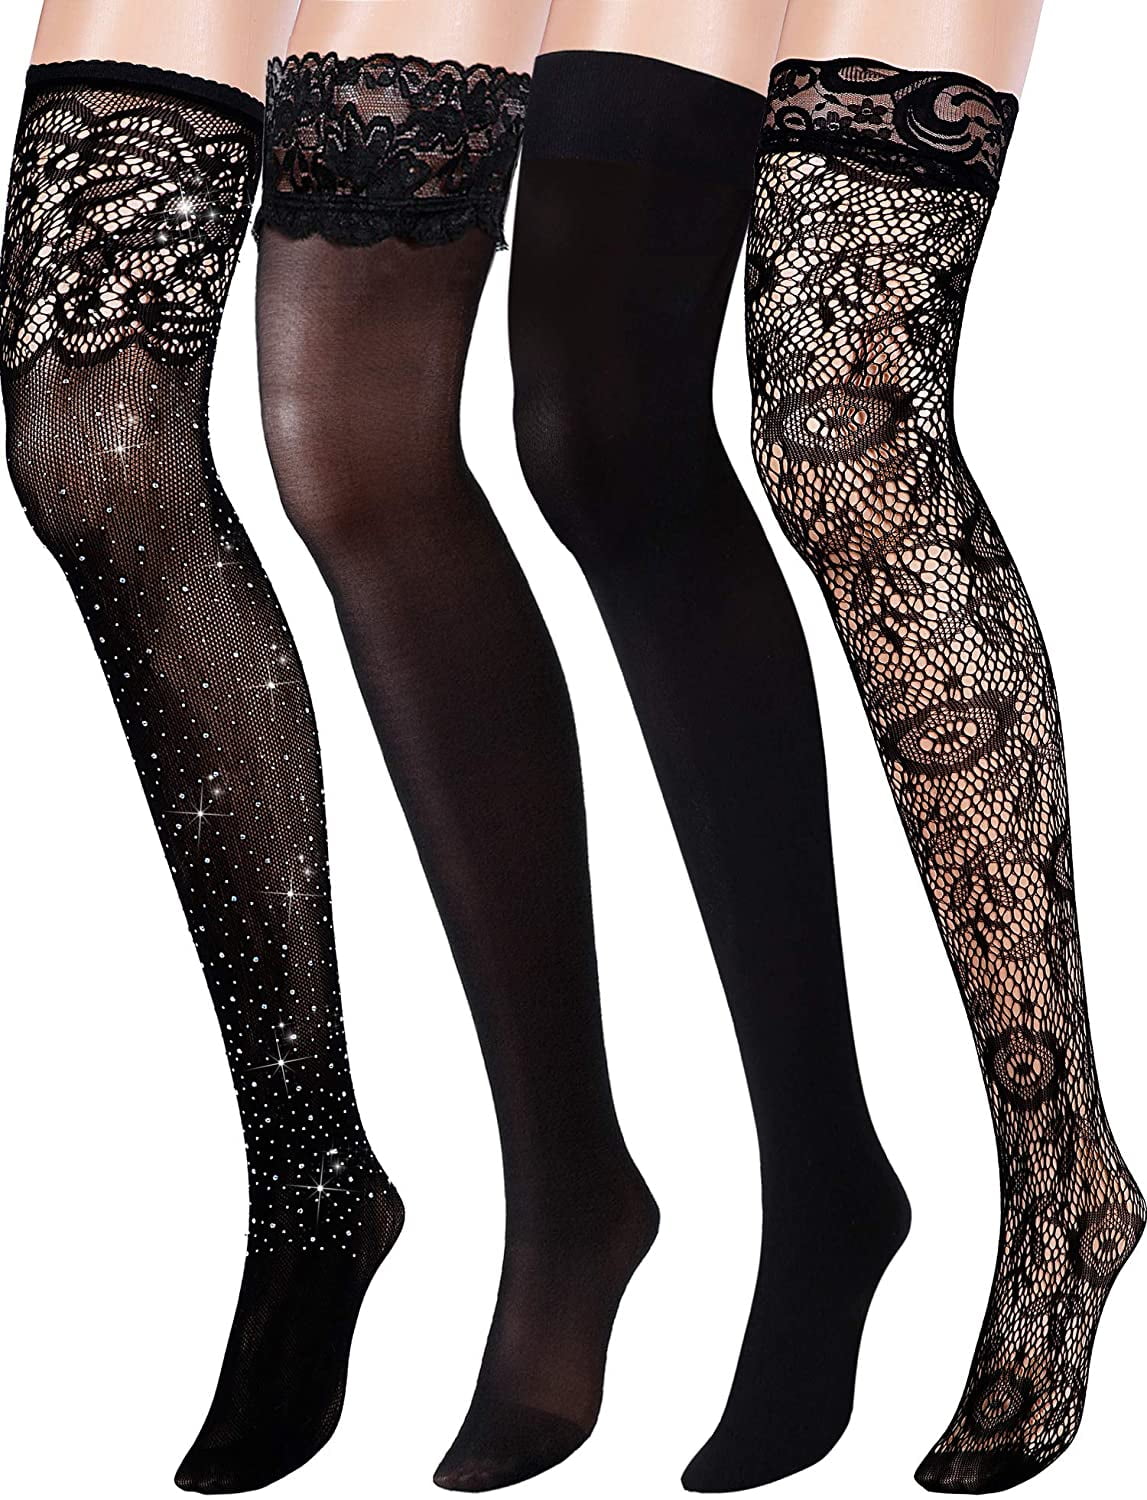 6 Pairs Fishnet Stockings Womens High Waist Lace Tights for Girls Ladies Multicolored B 